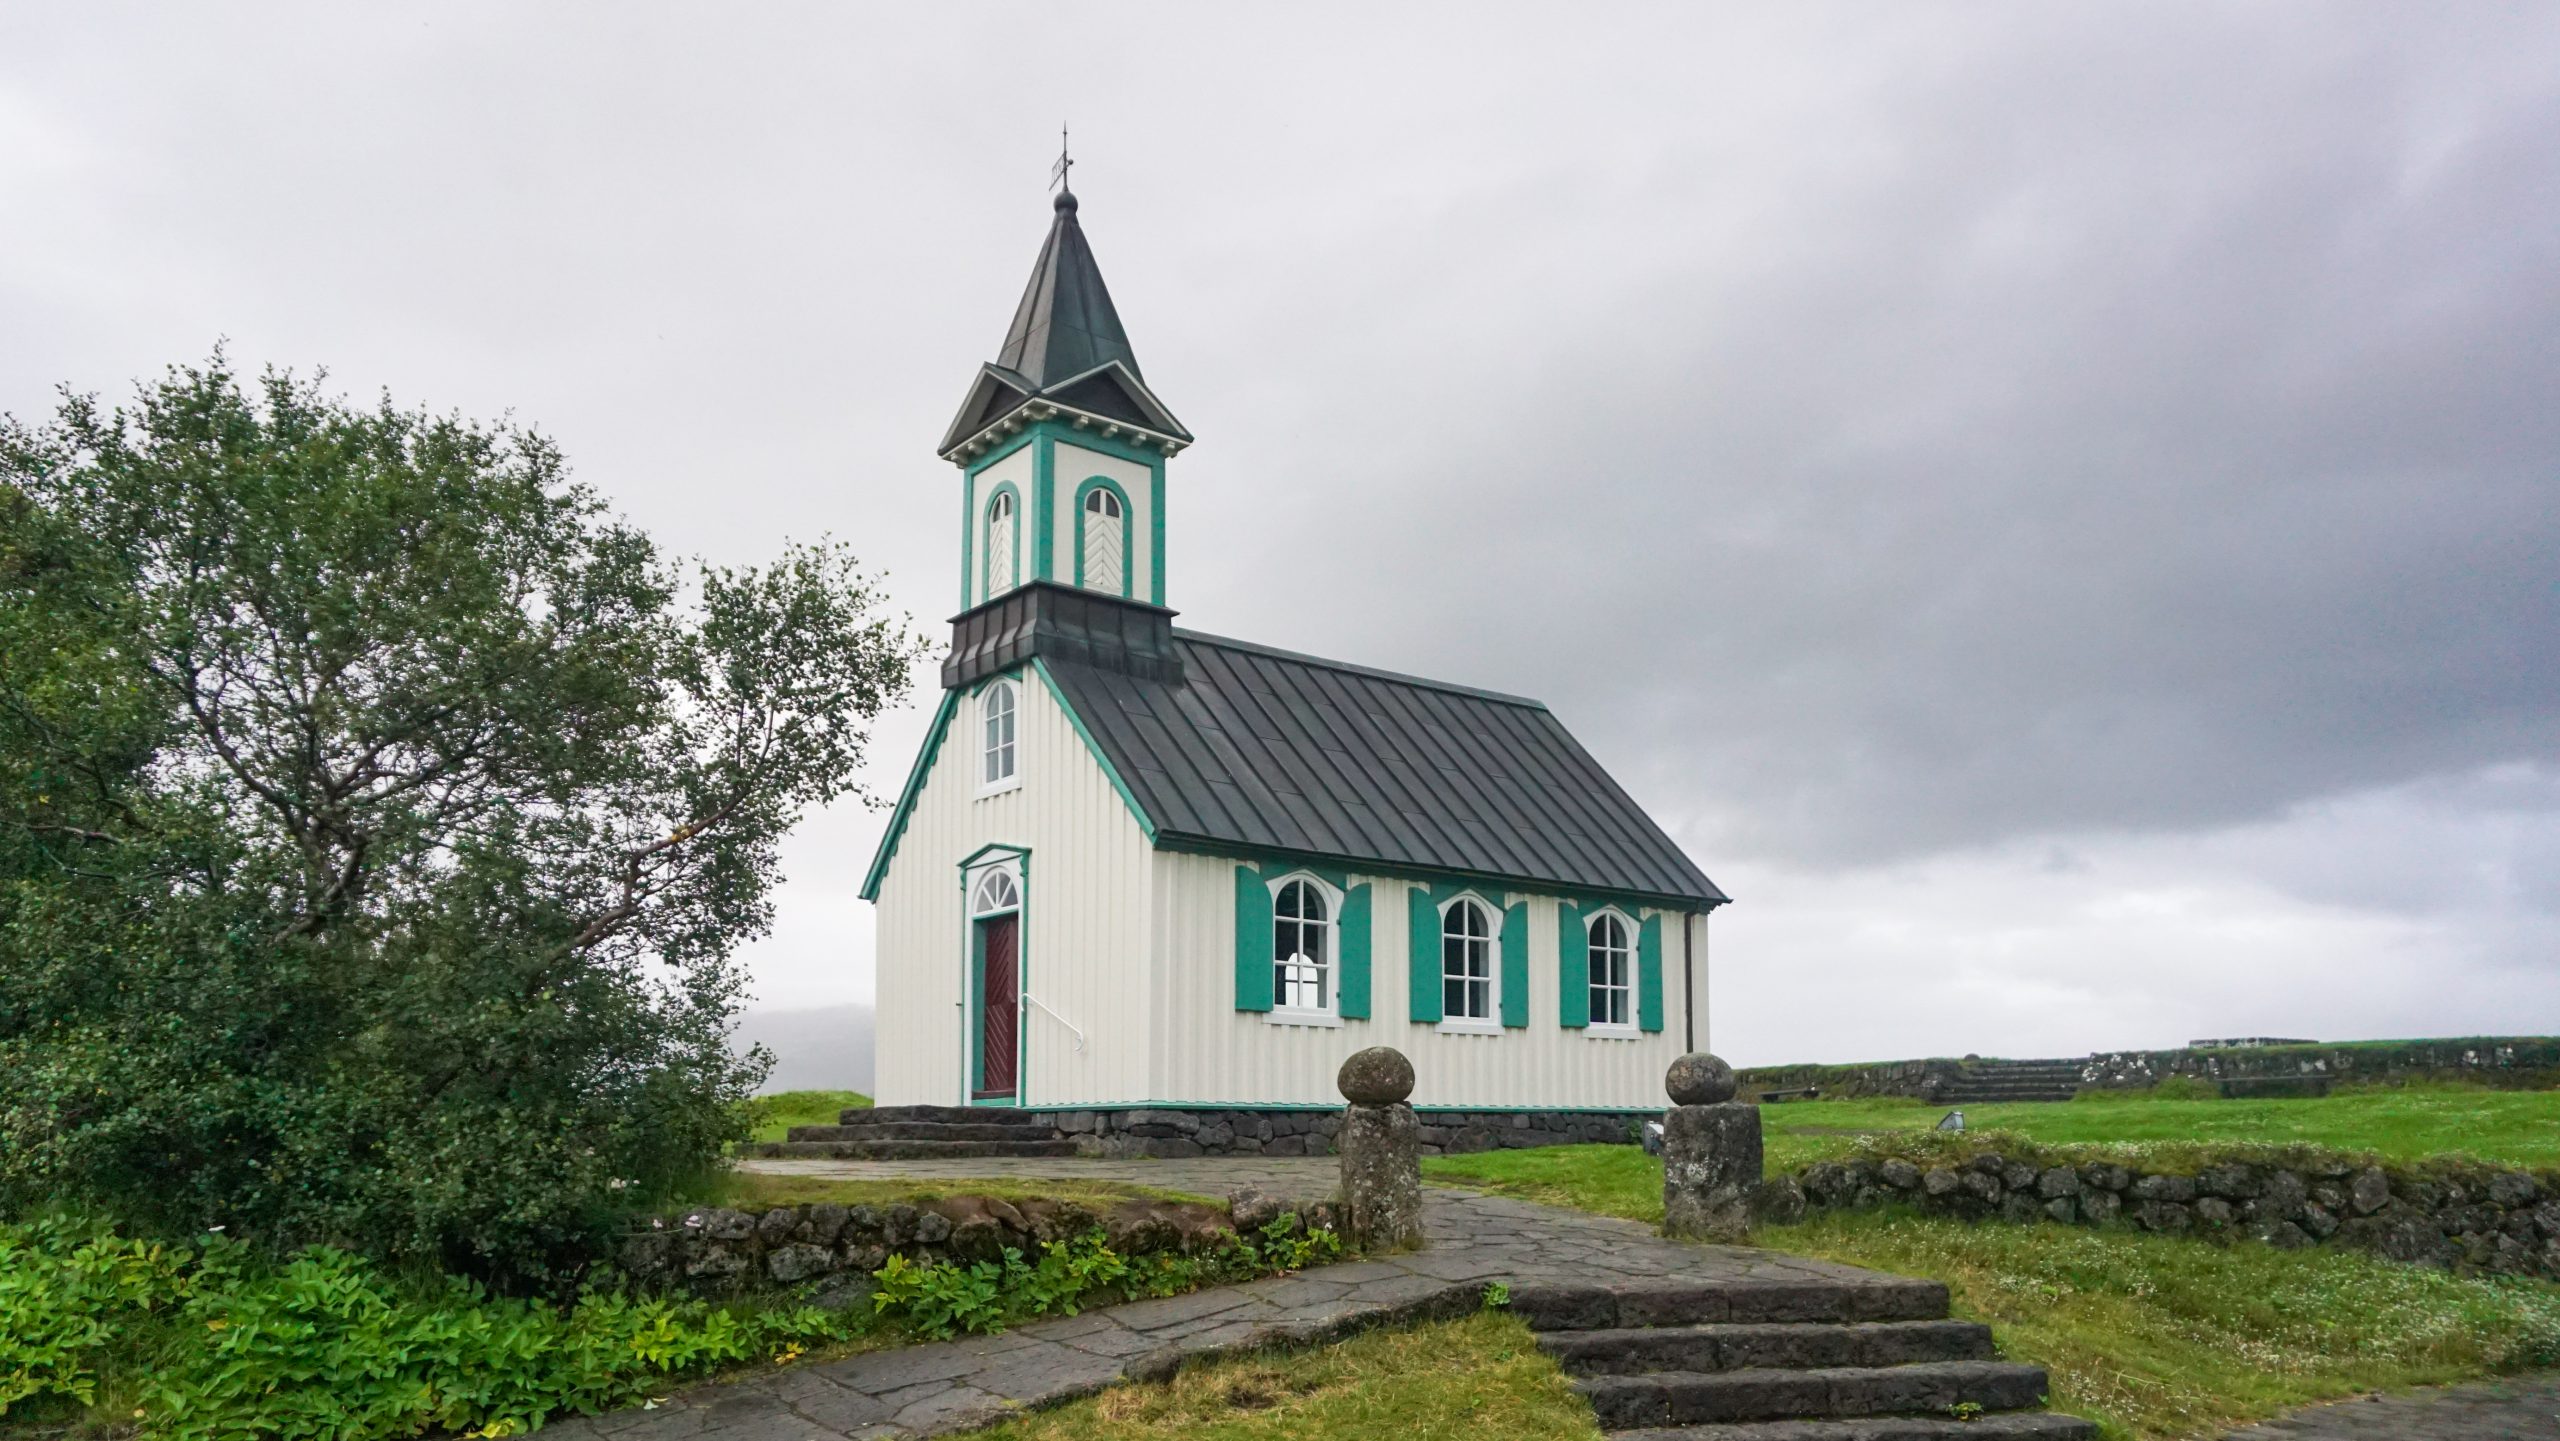 A church in Thingvellir National Park during a stop of the road trip itinerary around Iceland